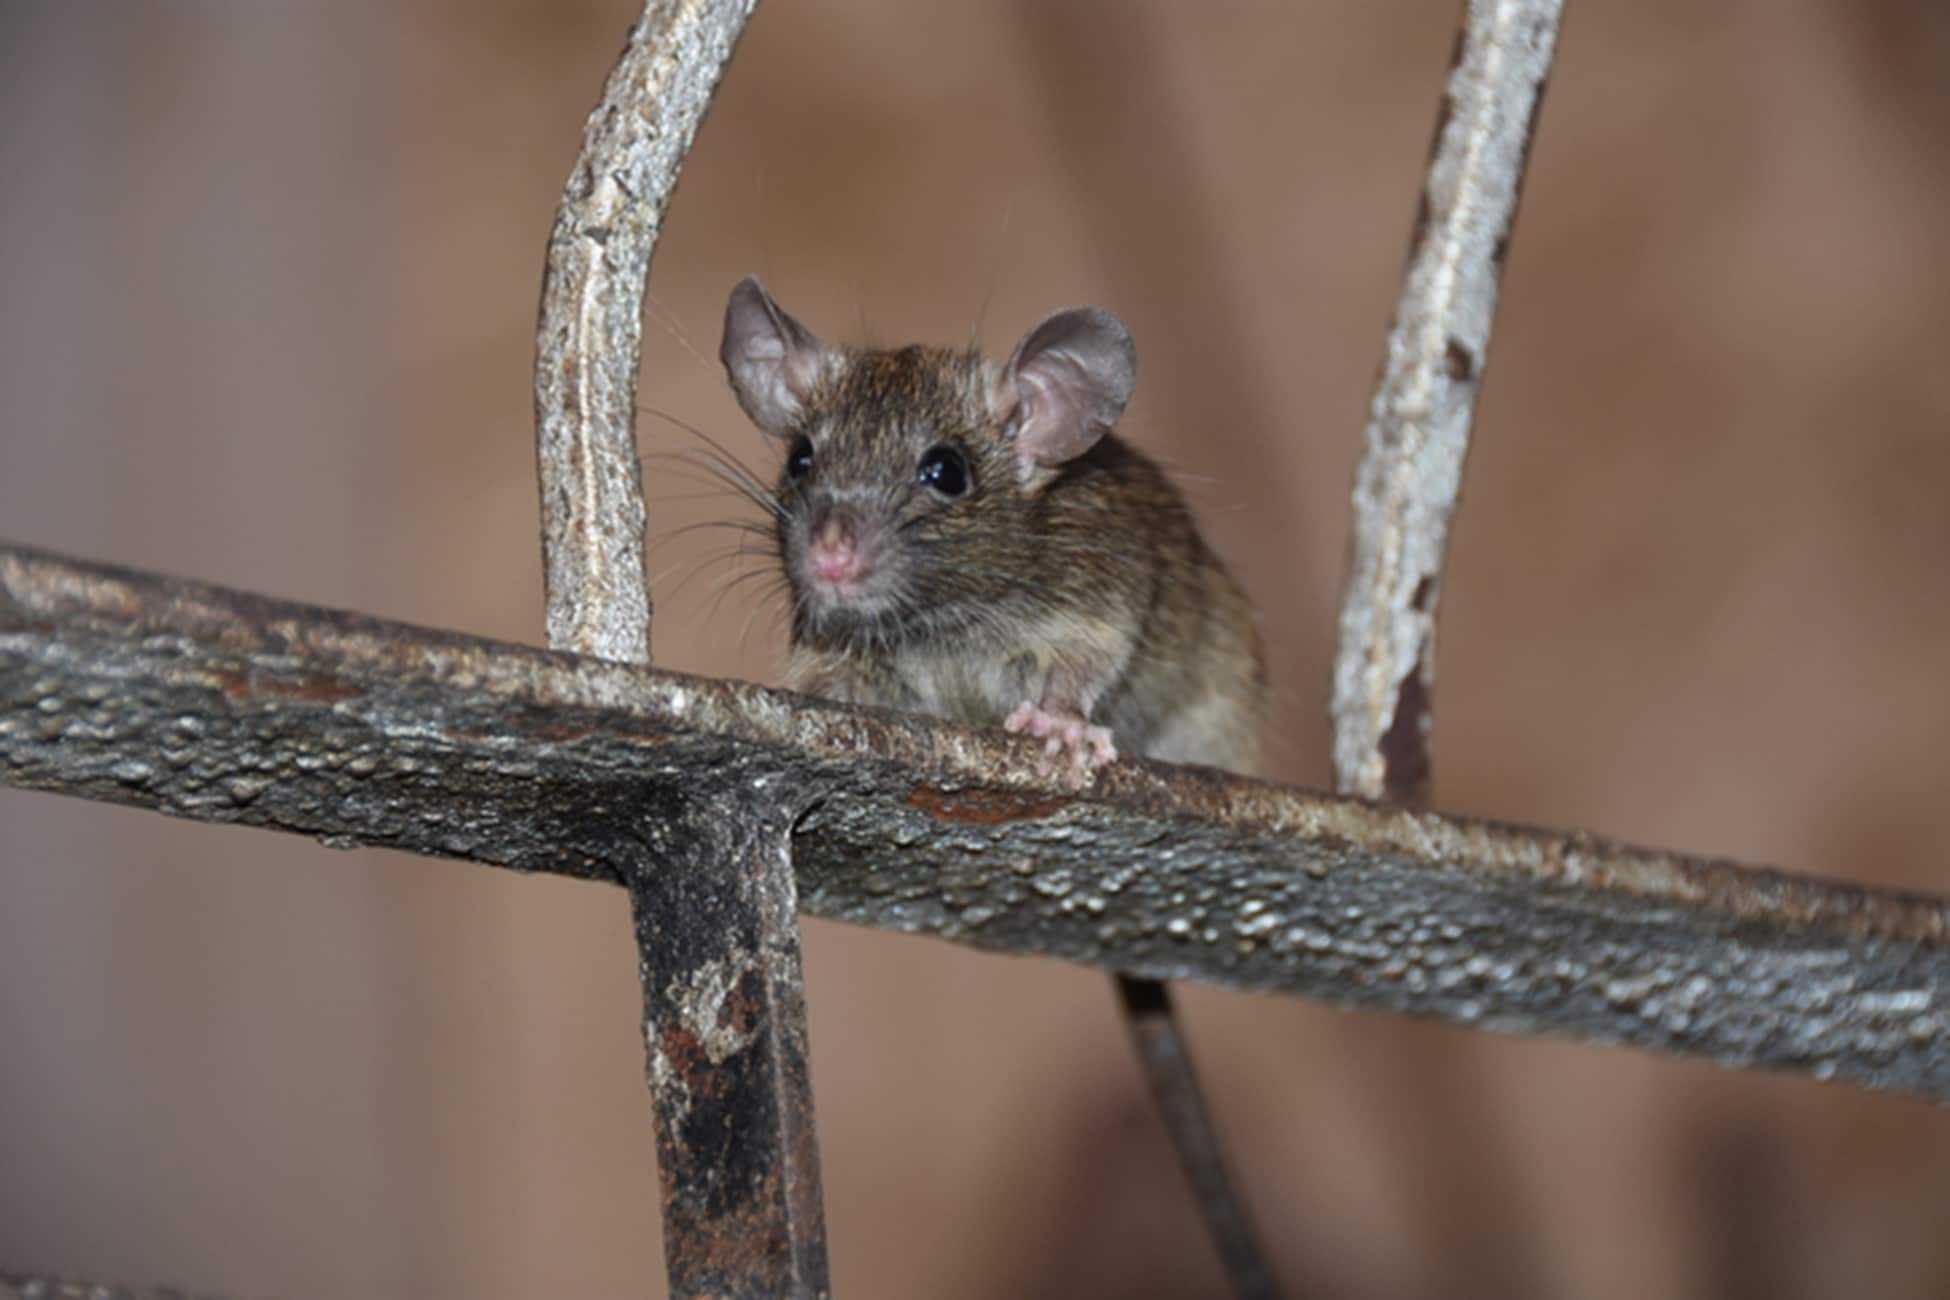 A mouse climbing on a metal fence.